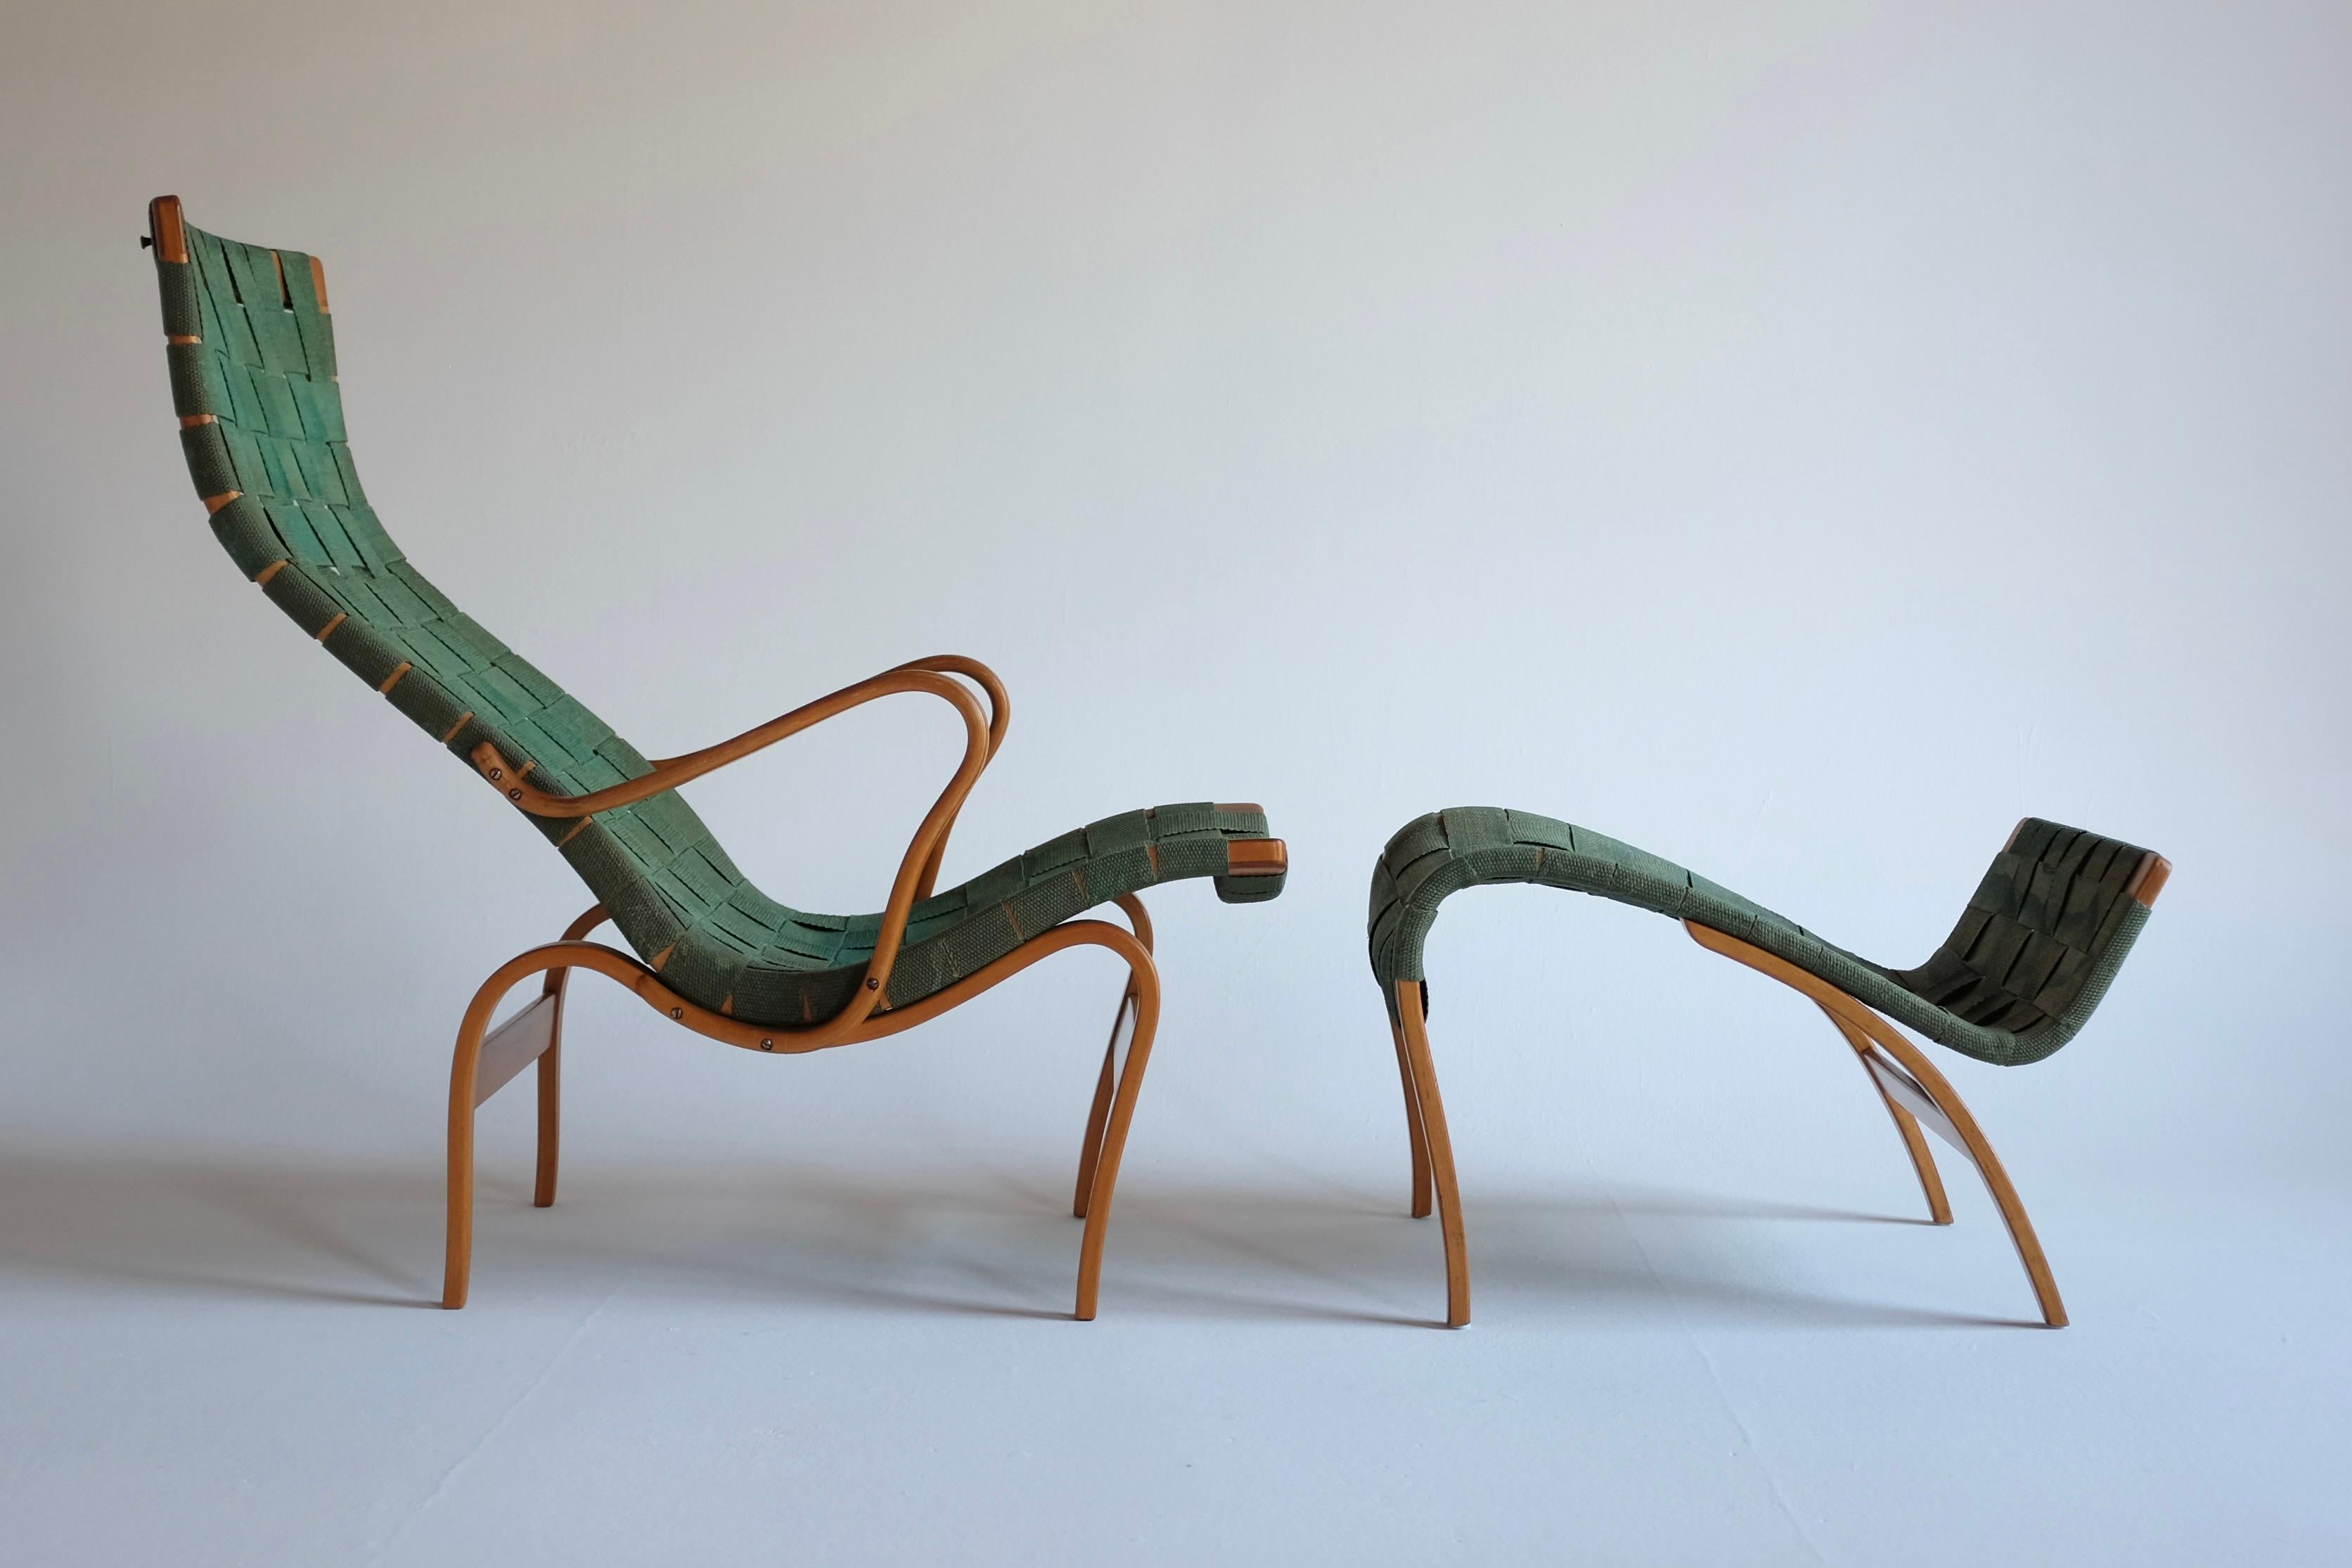 The Iconic Pernilla lounge chair and Ottoman by Bruno Mathsson for Firma Karl Mathsson. From the late 1940’s/early 1950s with the signature of the maker and designer on the chair and the Ottoman. Upholstered in a rare green webbing with age